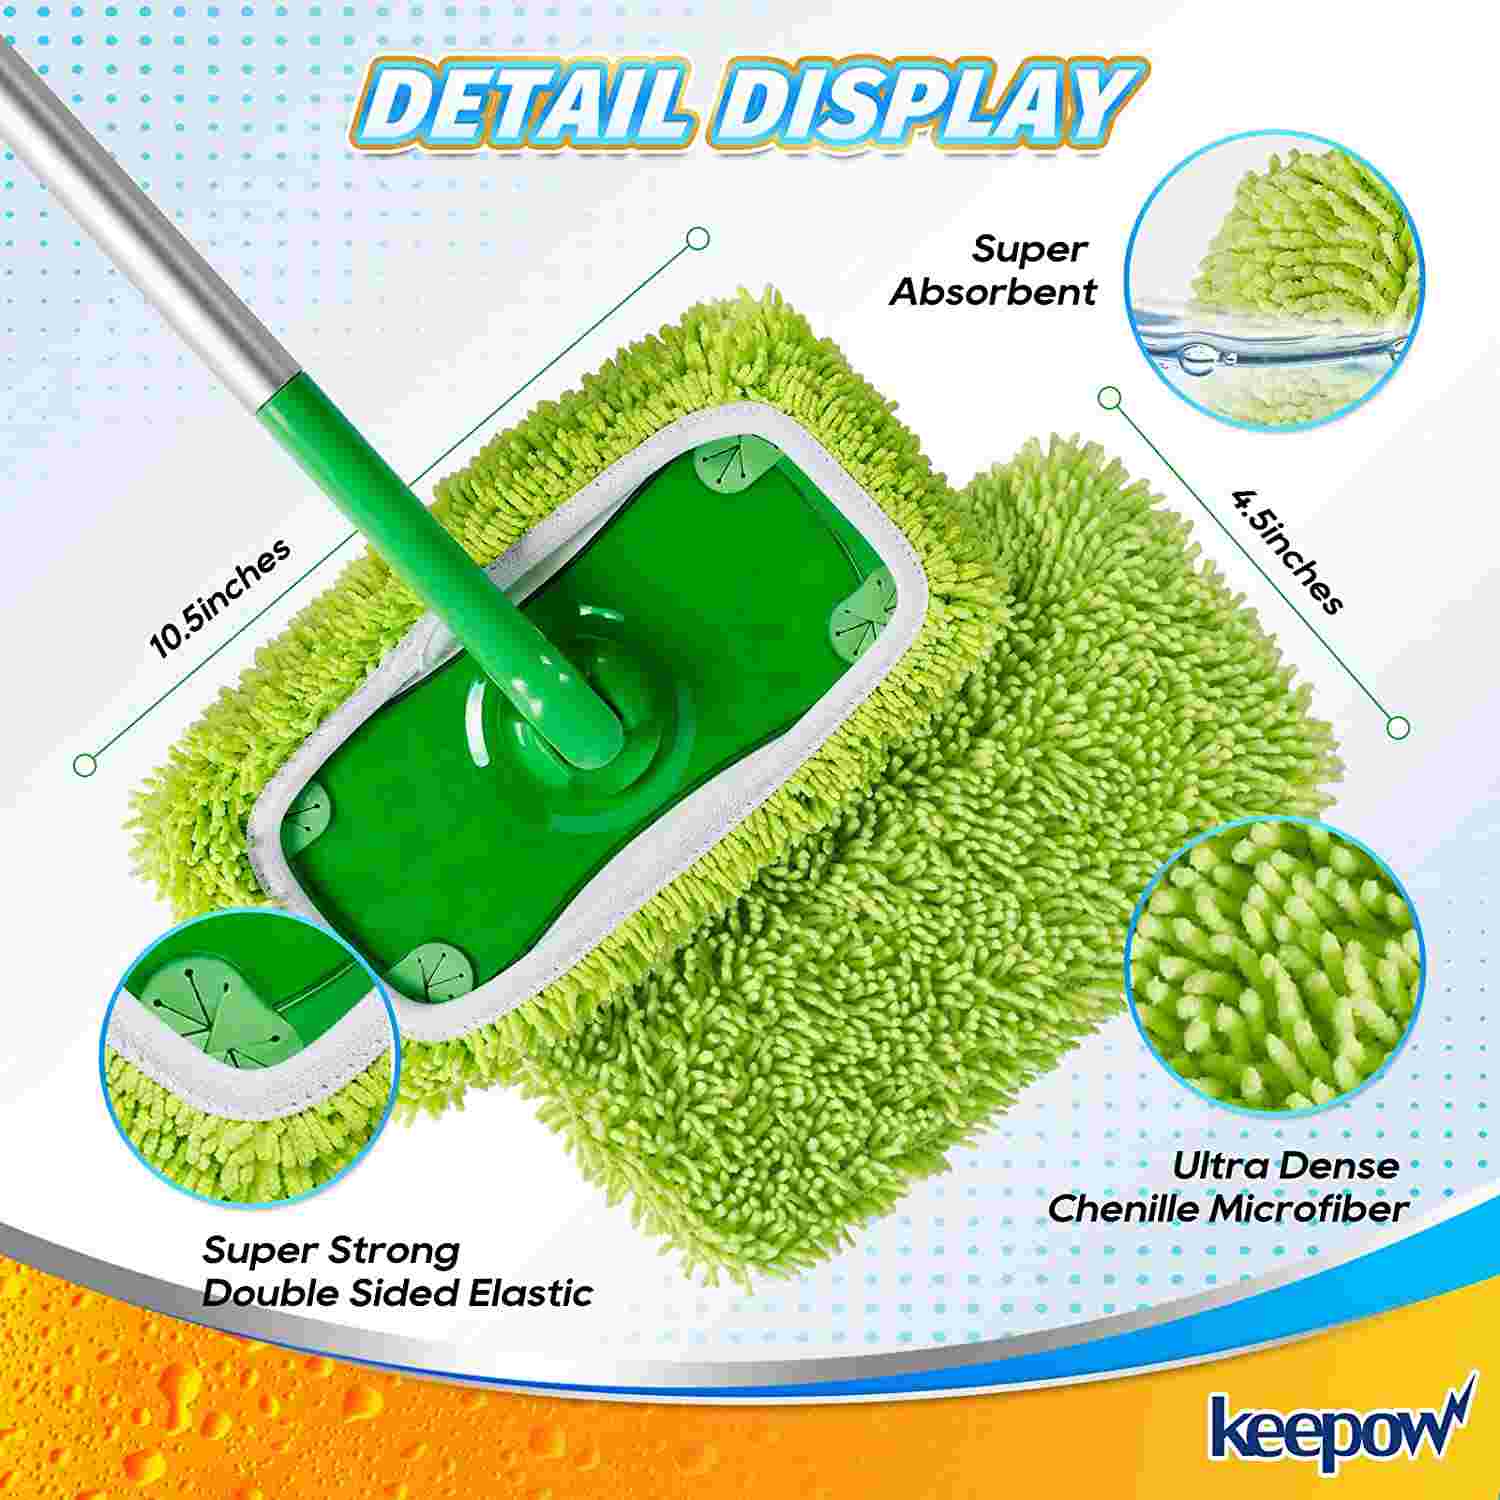 KEEPOW Reusable & Washable Microfiber Mop Pads Refills for Hard-Surface/Hardwood Floor Cleaning, 6 Pack